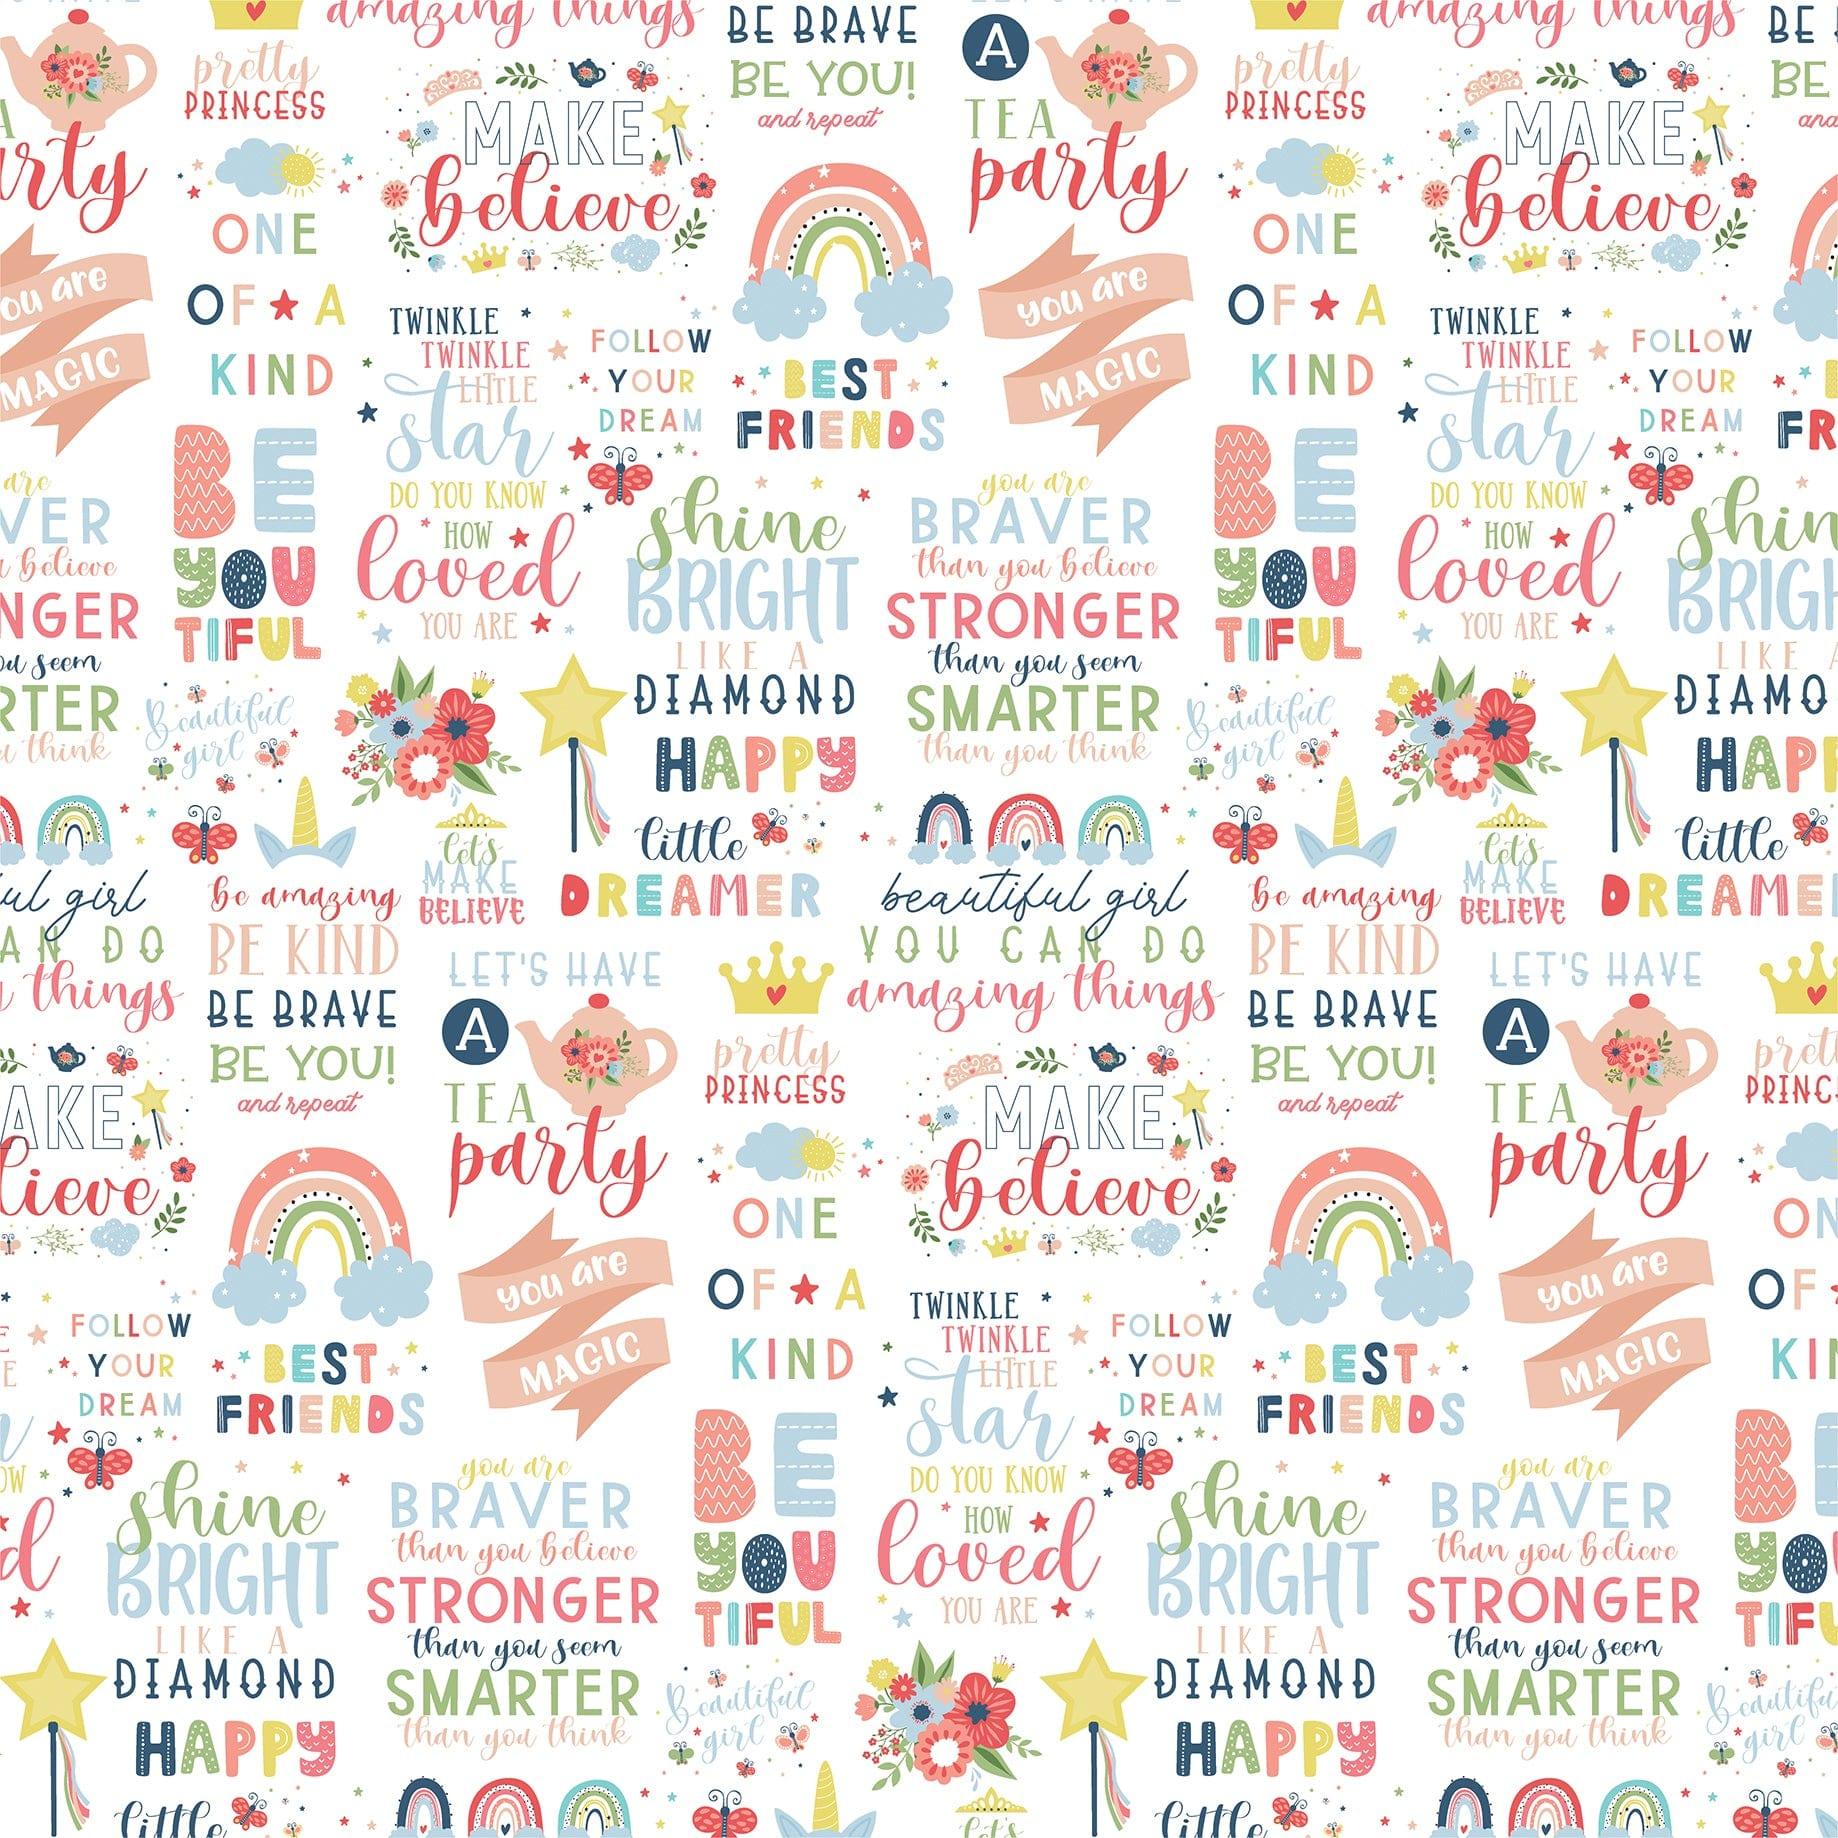 Little Dreamer Girl Collection You Are Magic 12 x 12 Double-Sided Scrapbook Paper by Echo Park Paper - Scrapbook Supply Companies